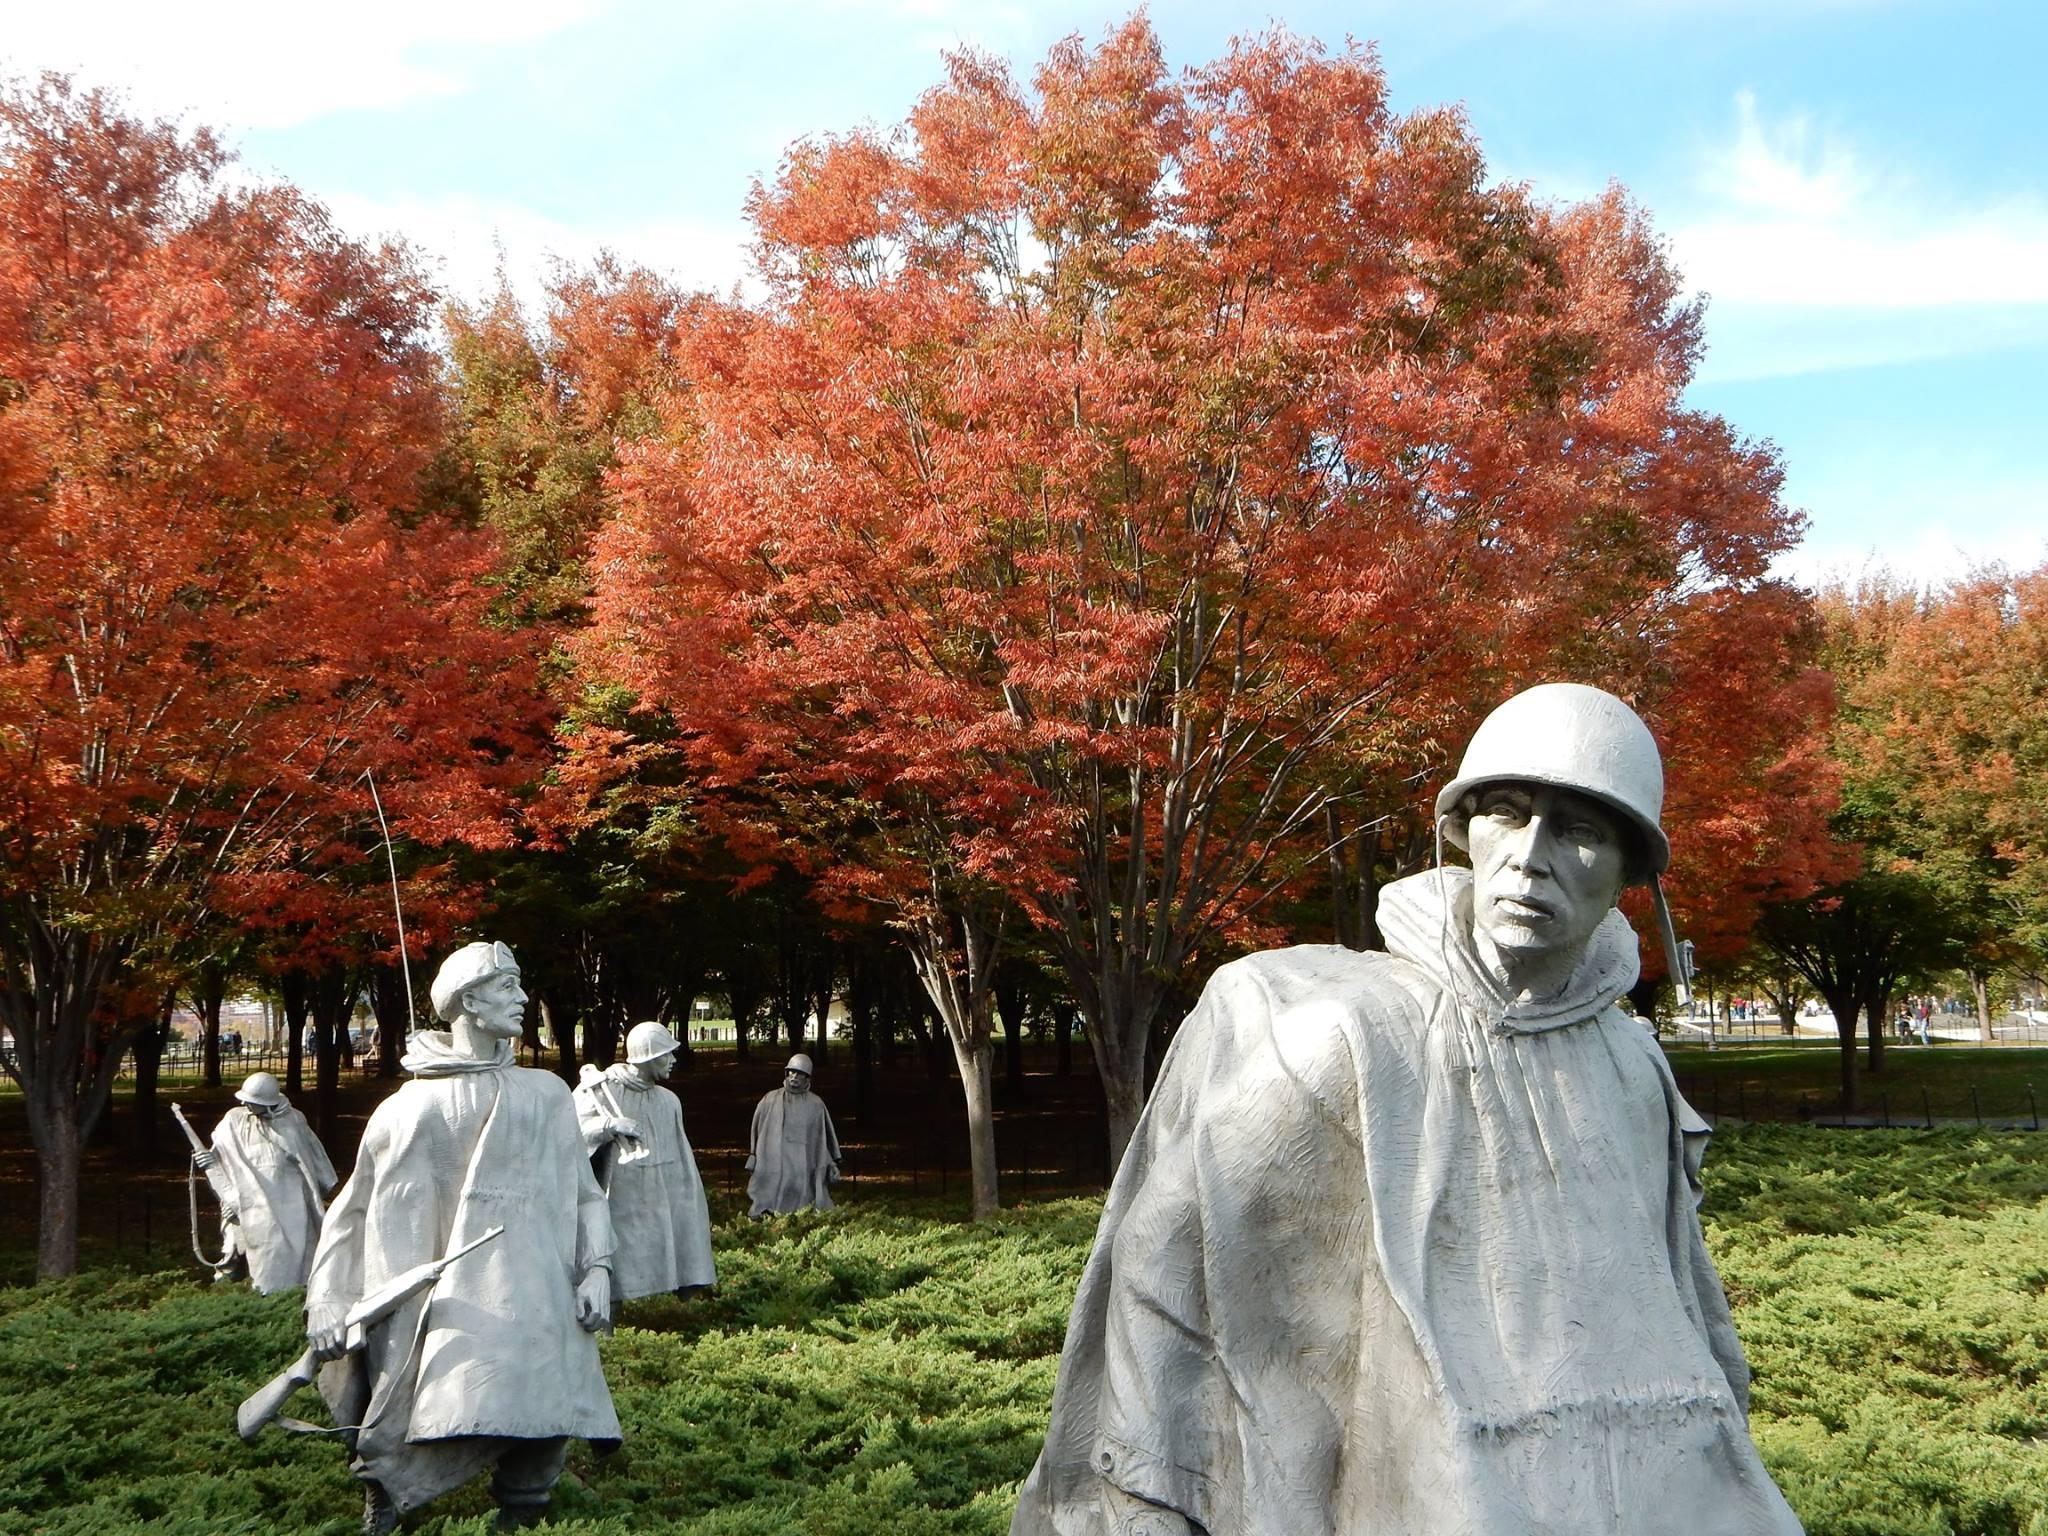 Statues of servicemen from the Korean War with fall foliage in the background